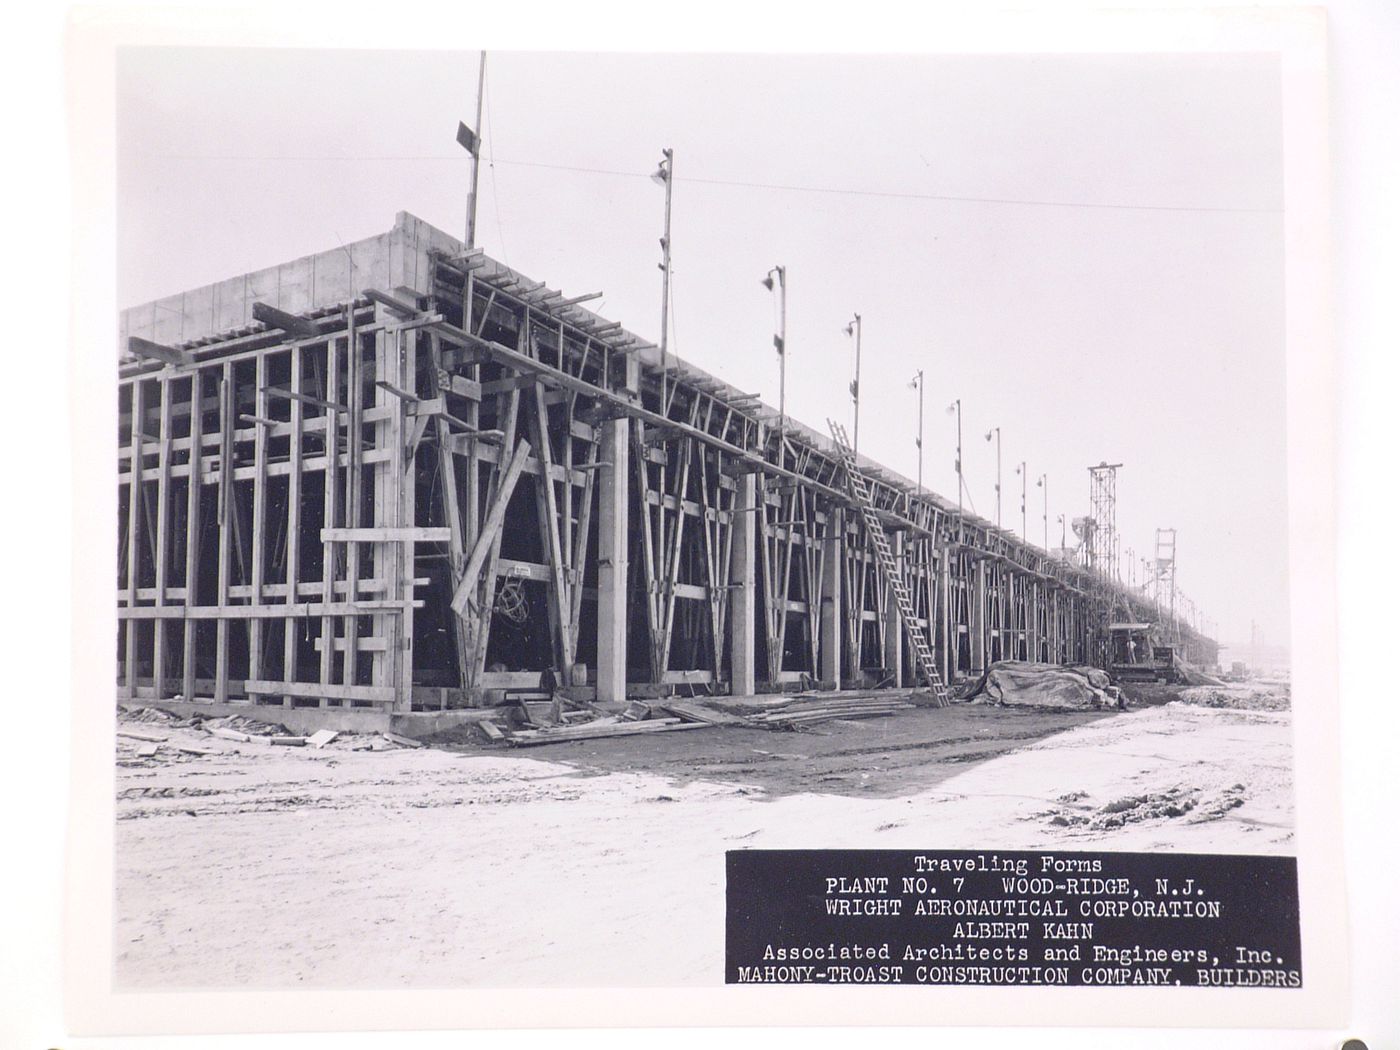 View of Assembly Building No. 7 [?] under construction, Wright Aeronautical Corporation Airplane Engine Assembly Plant, Wood-Ridge, New Jersey